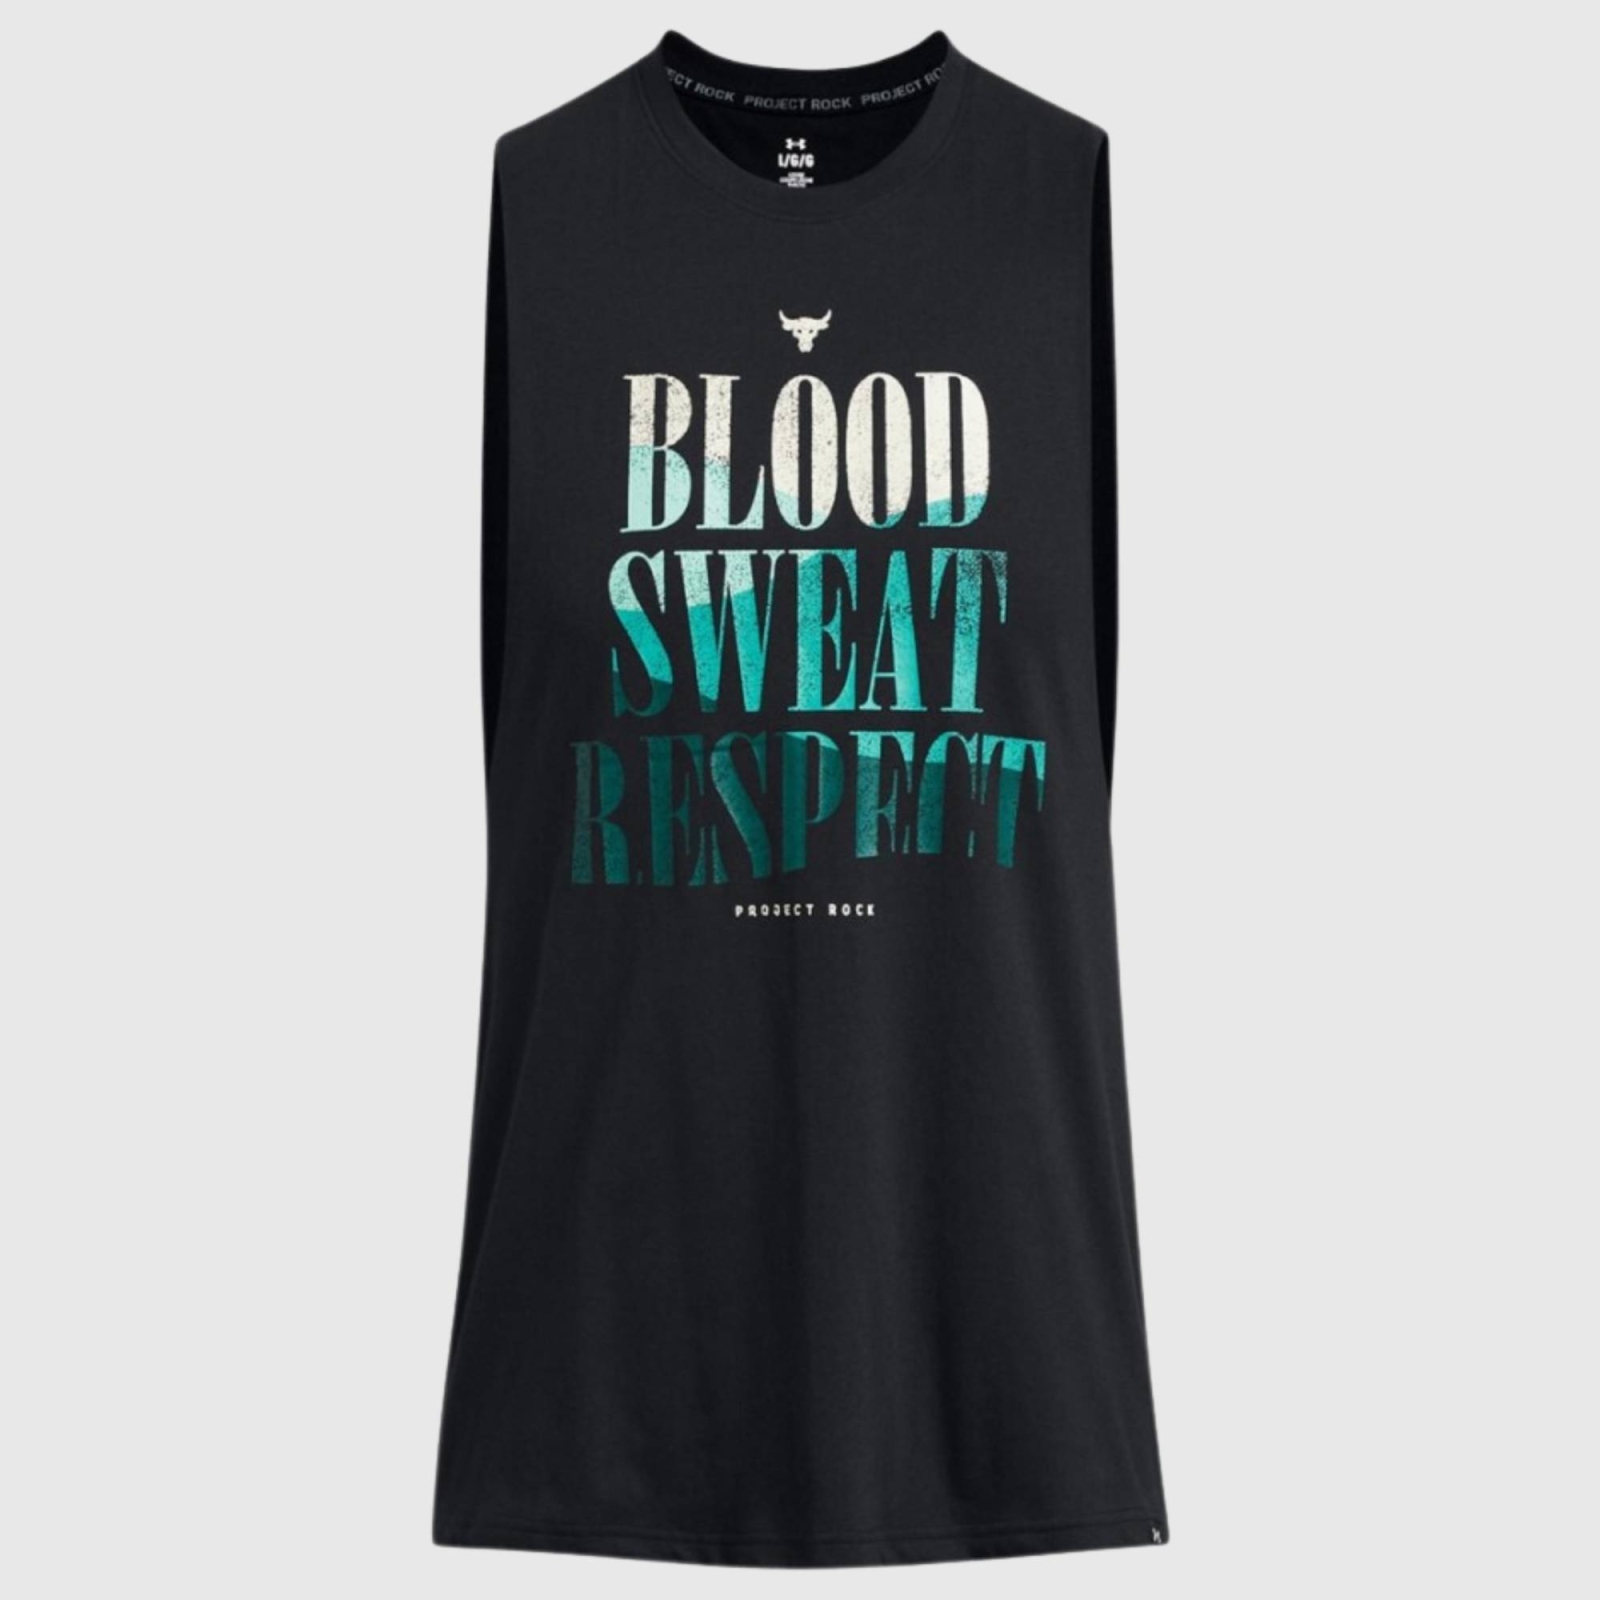 UNDER ARMOUR PROJECT ROCK BSR PAYOFF TANK